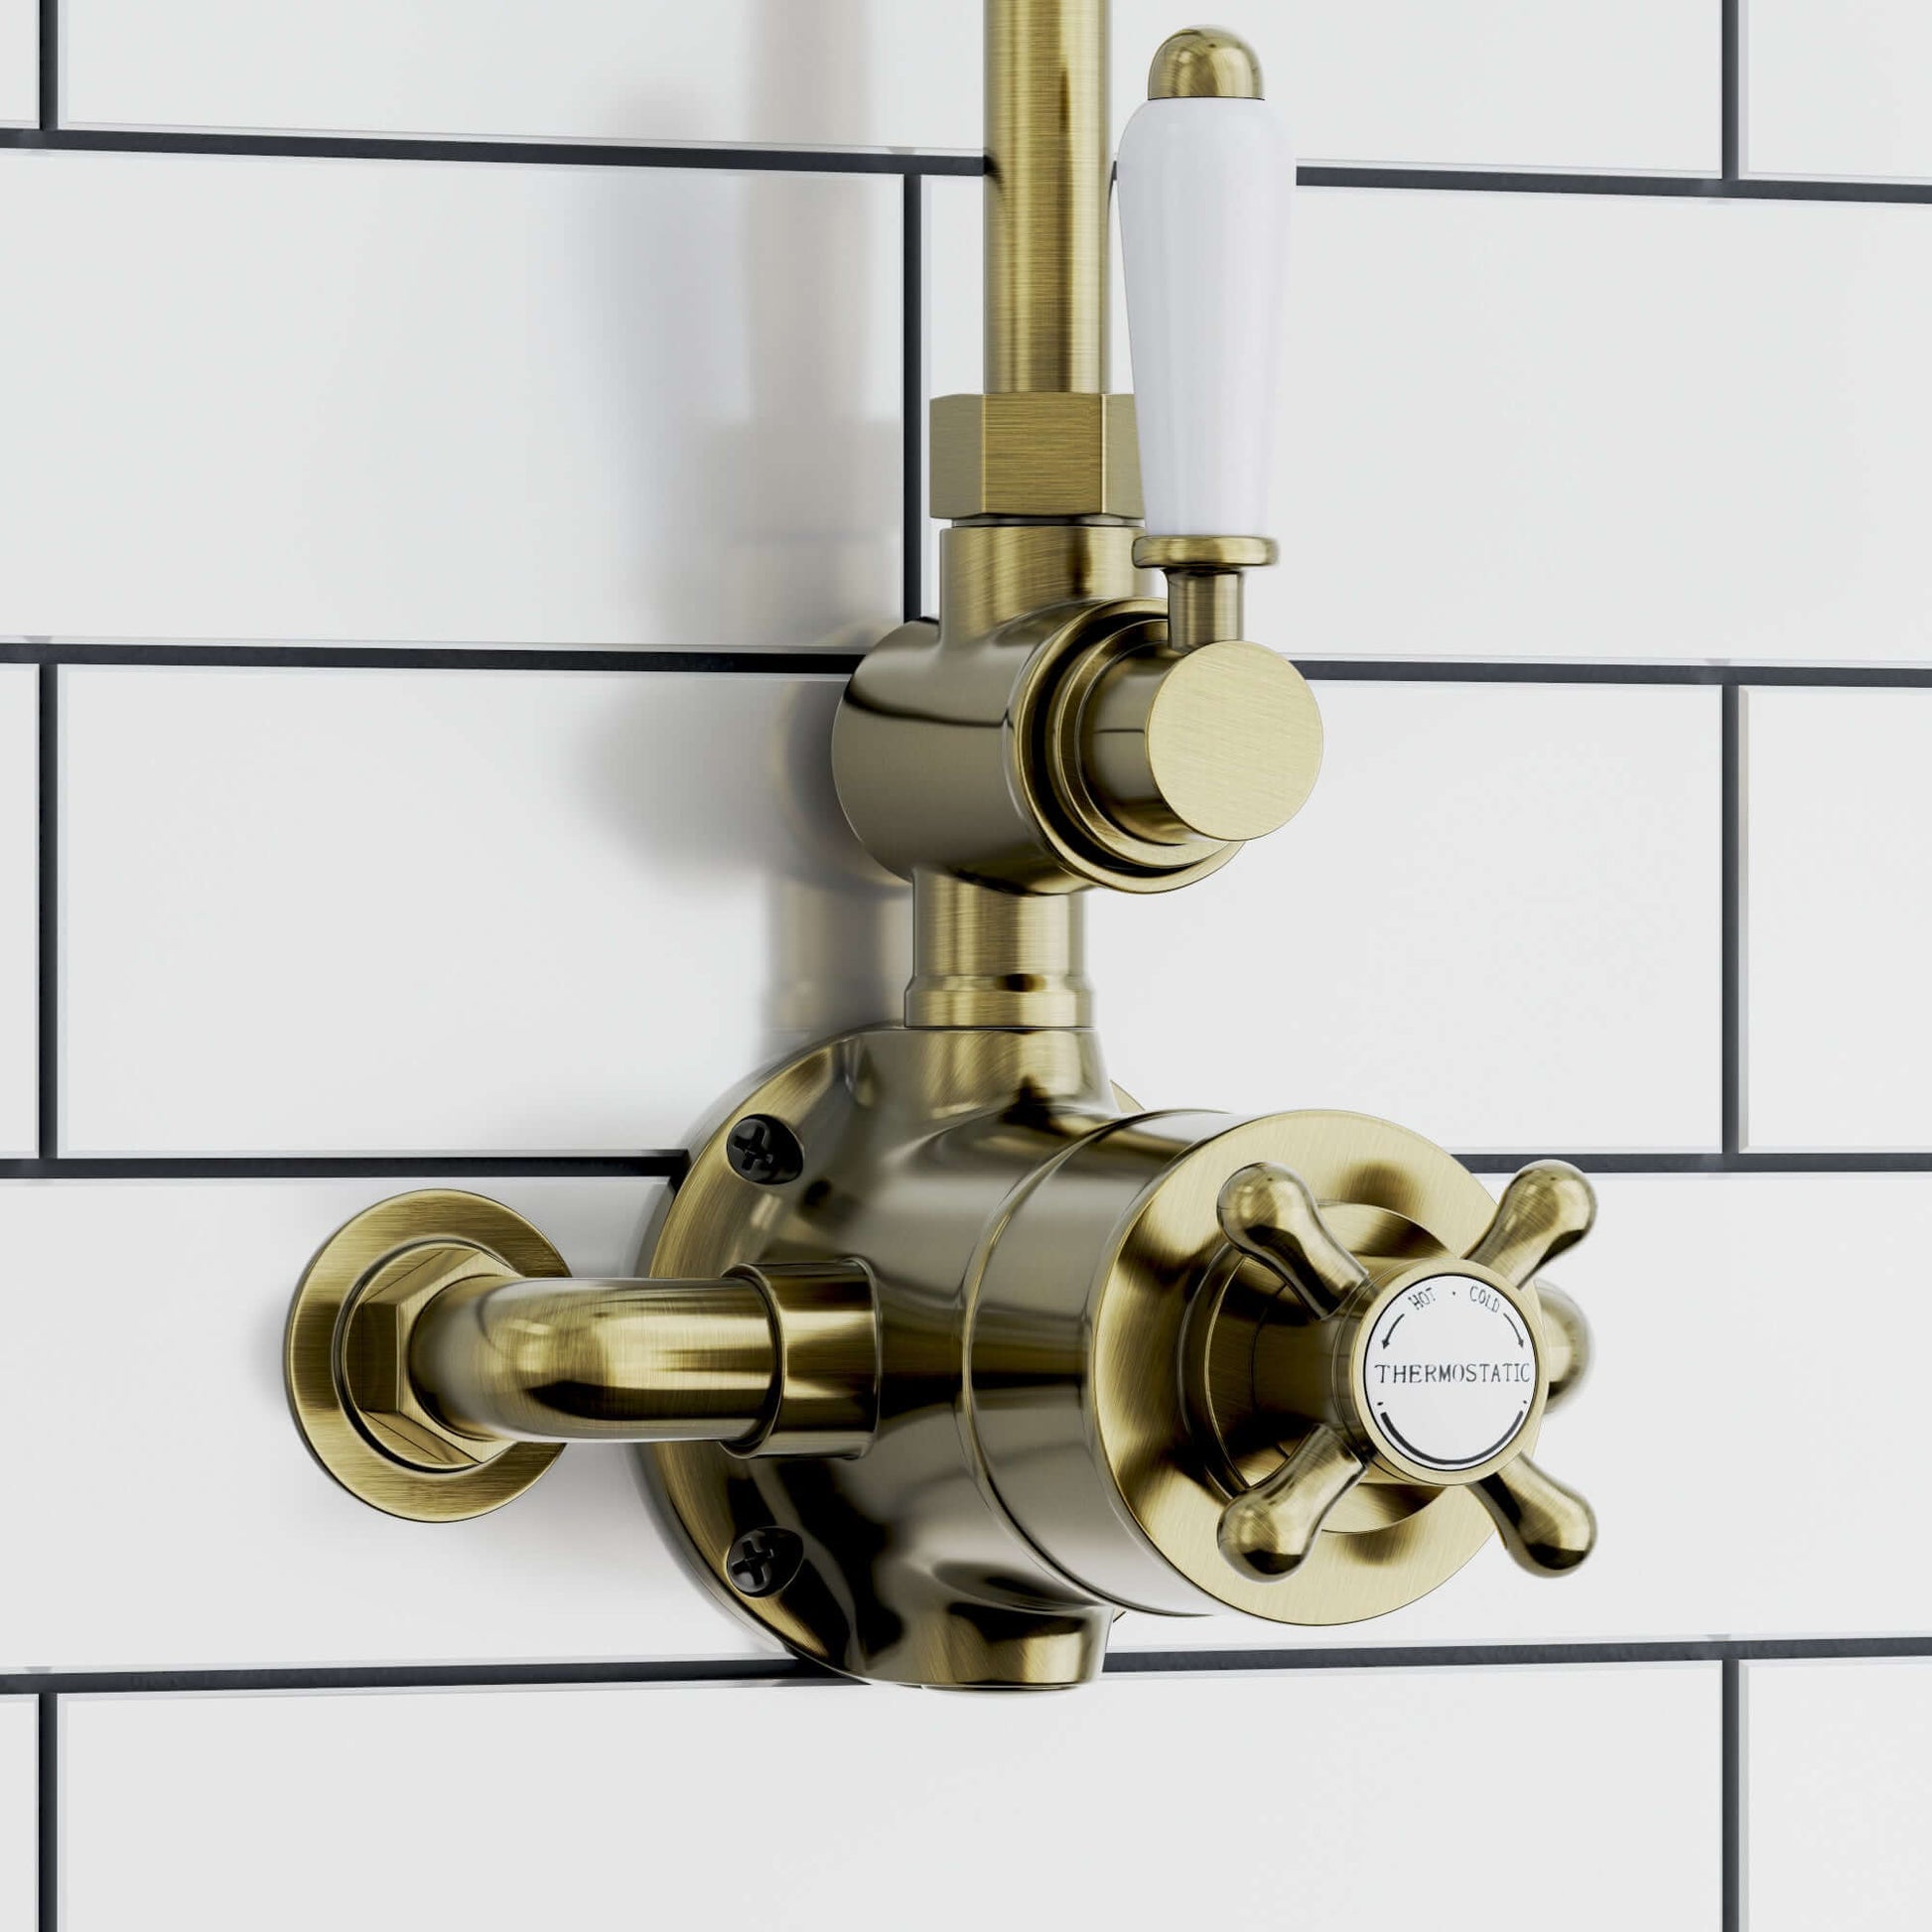 Downton Exposed Traditional Thermostatic Shower Set Single Outlet Incl. Twin Shower Valve, Rigid Riser Rail, 150mm Shower Head - Antique Bronze And White - Showers